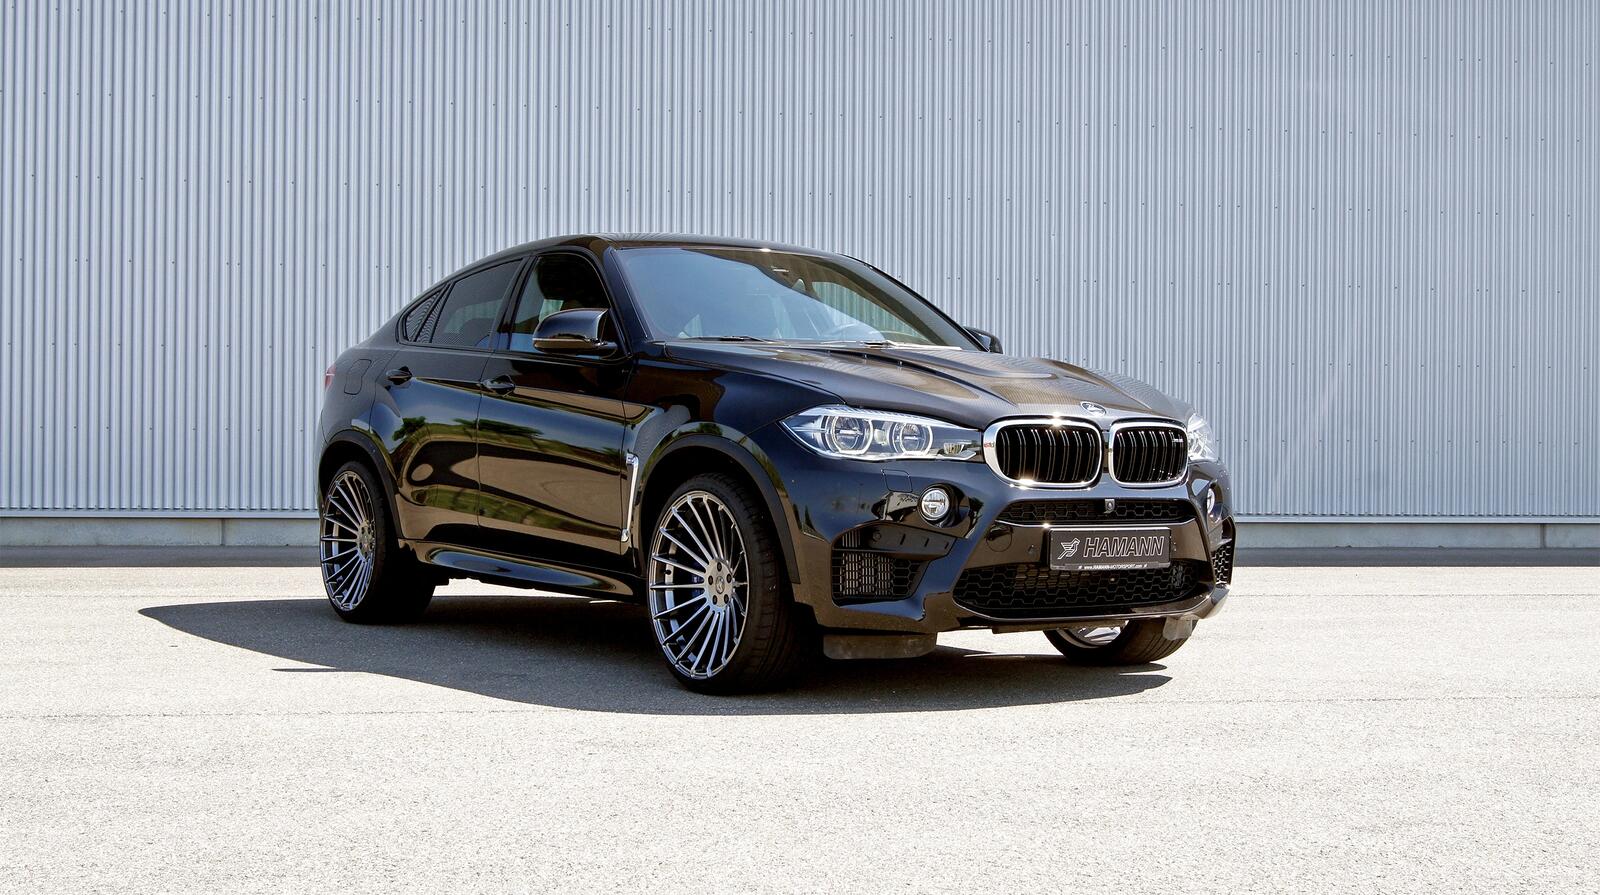 Wallpapers BMW X6 black side view on the desktop